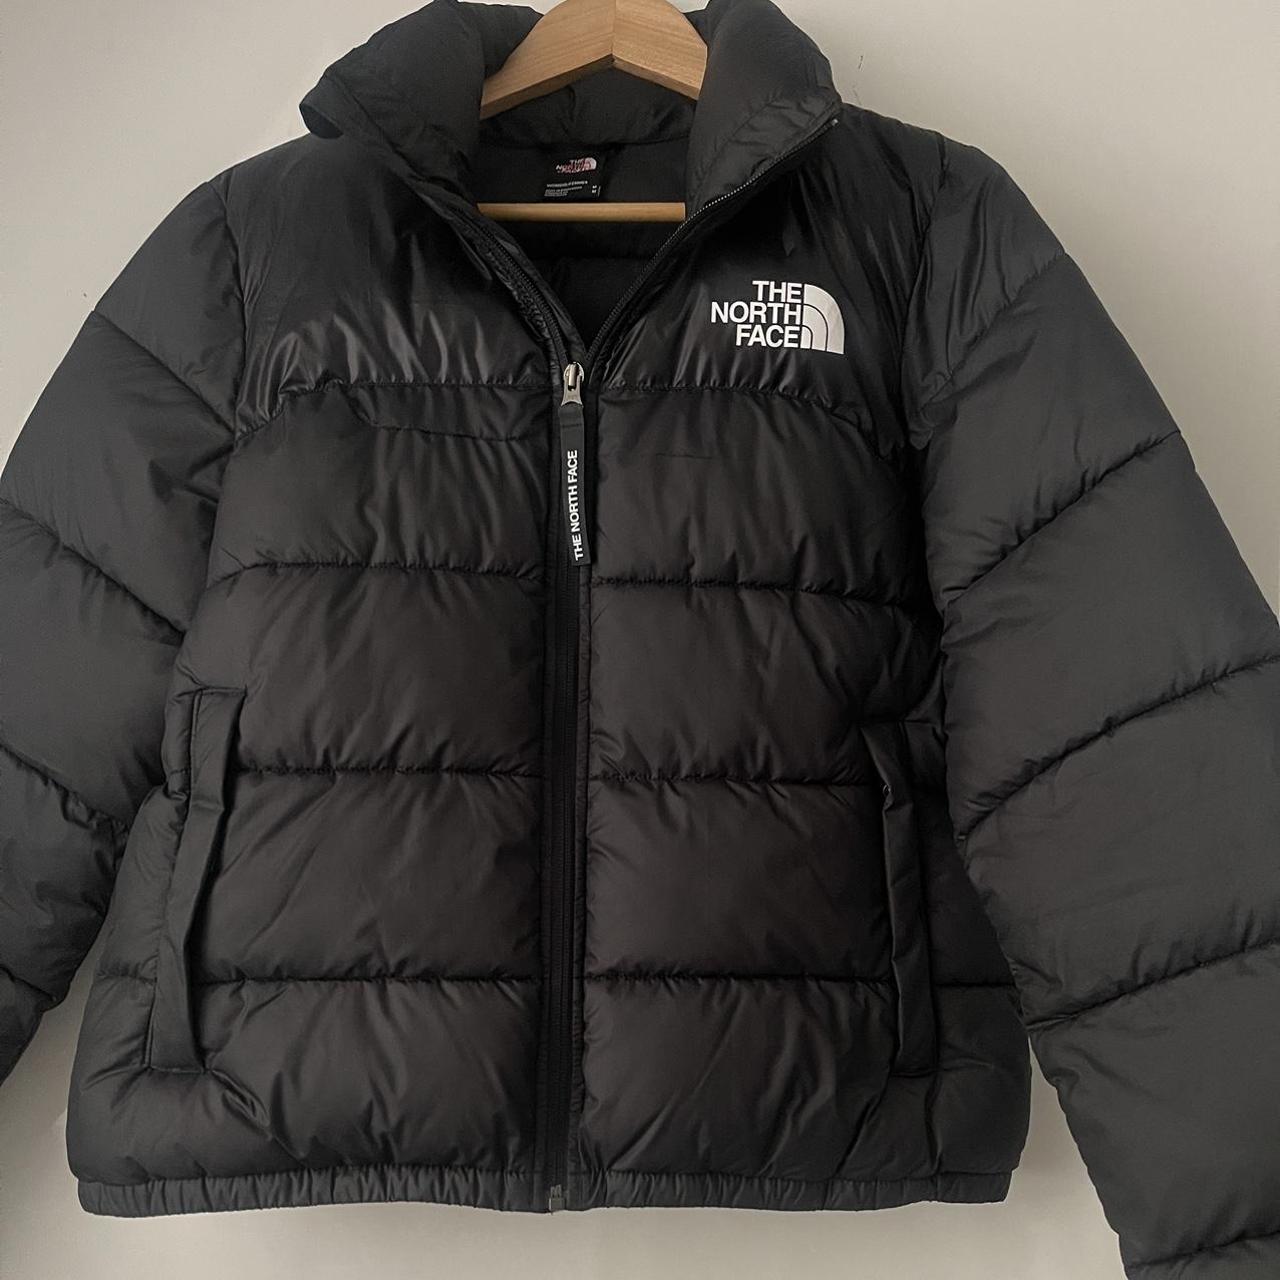 The North Face 1996 Retro Nupste Jacket Size M. Has... - Depop